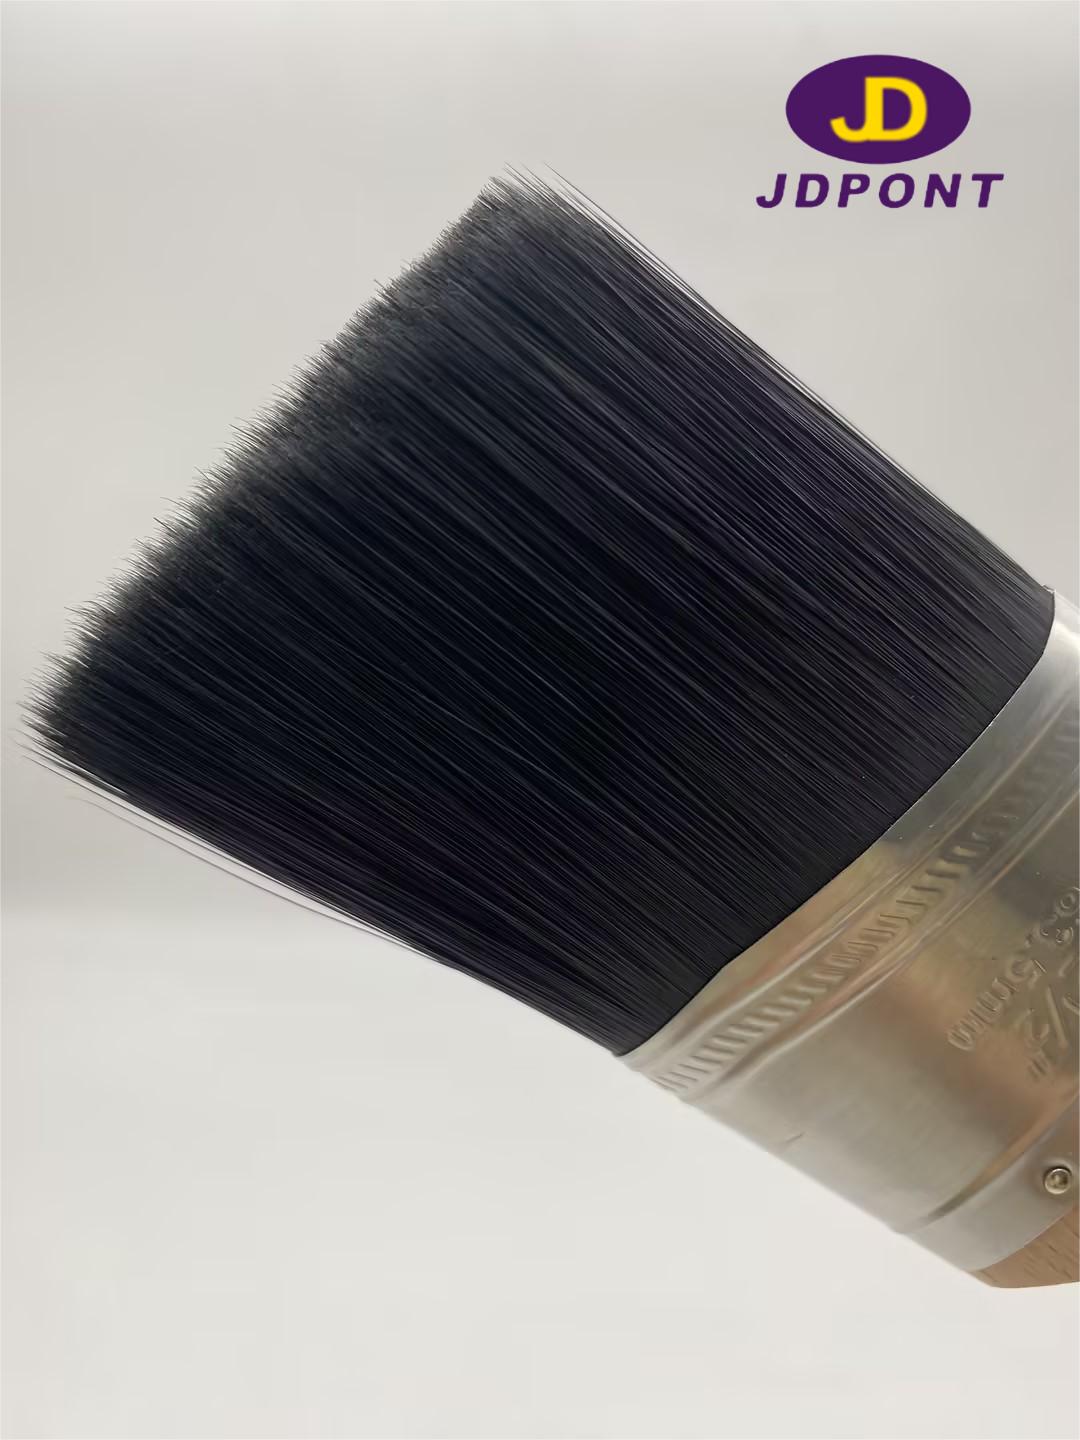 7 PRO-PA JDPBS 3 Wood Handle and 100% Synthetic Filament(Soild Round Tapered) Paint Brush(图2)